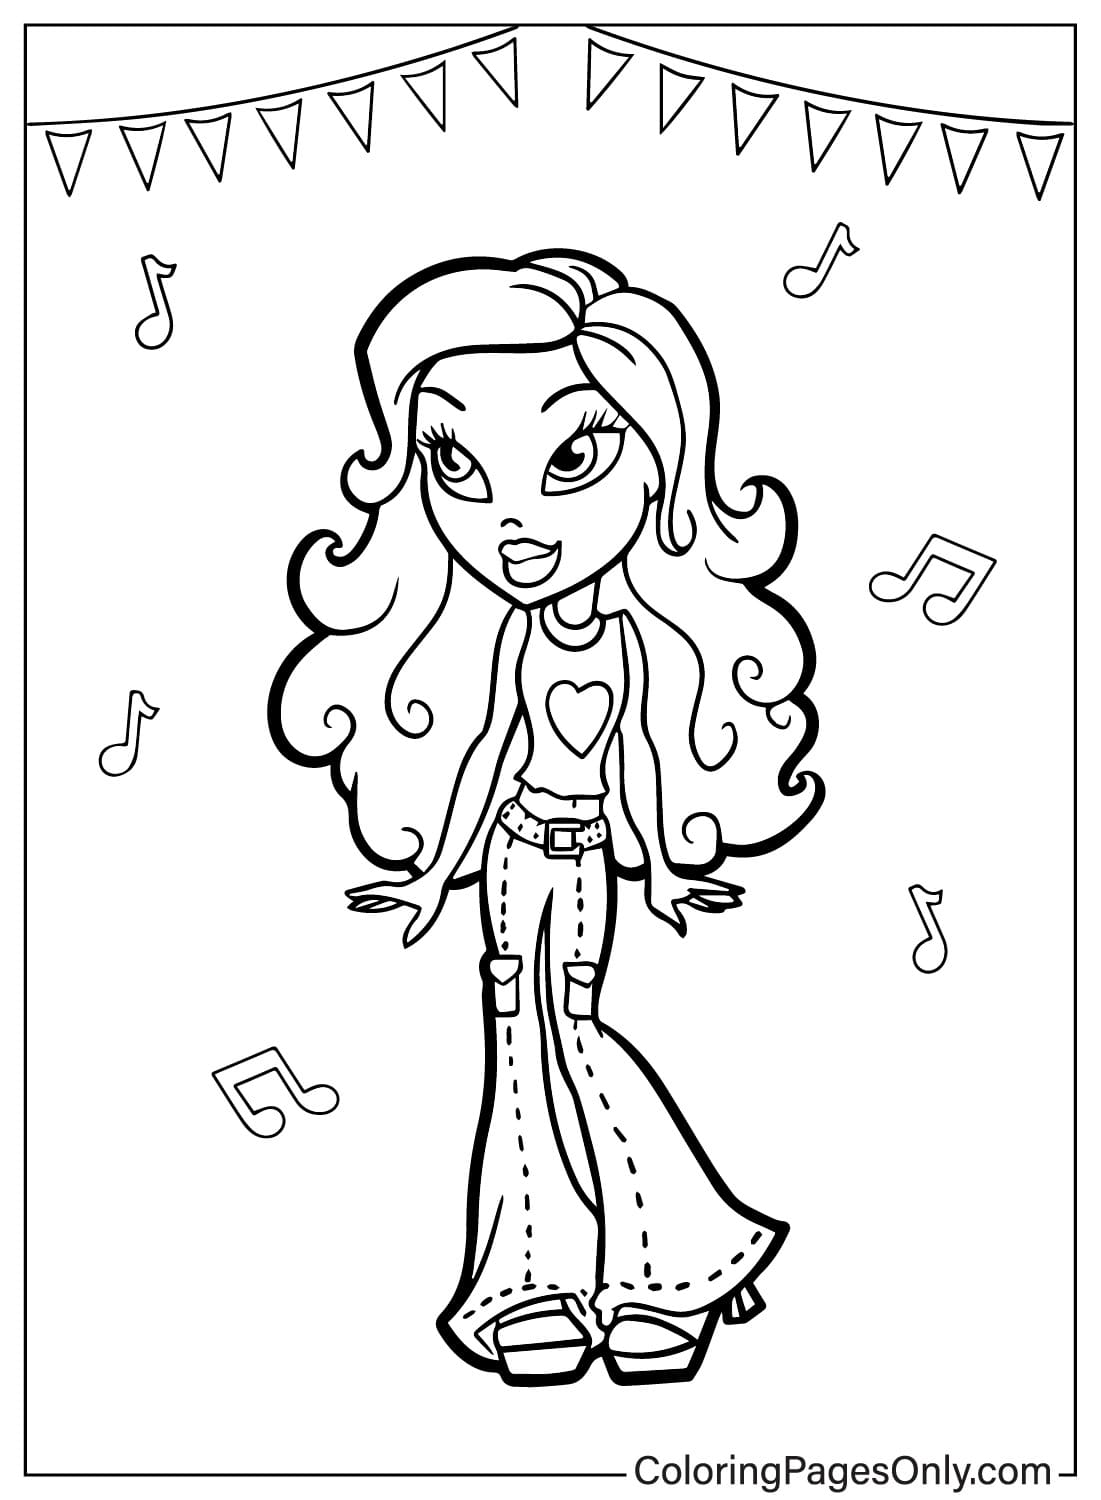 Bratz Coloring Page - Free Printable Coloring Pages